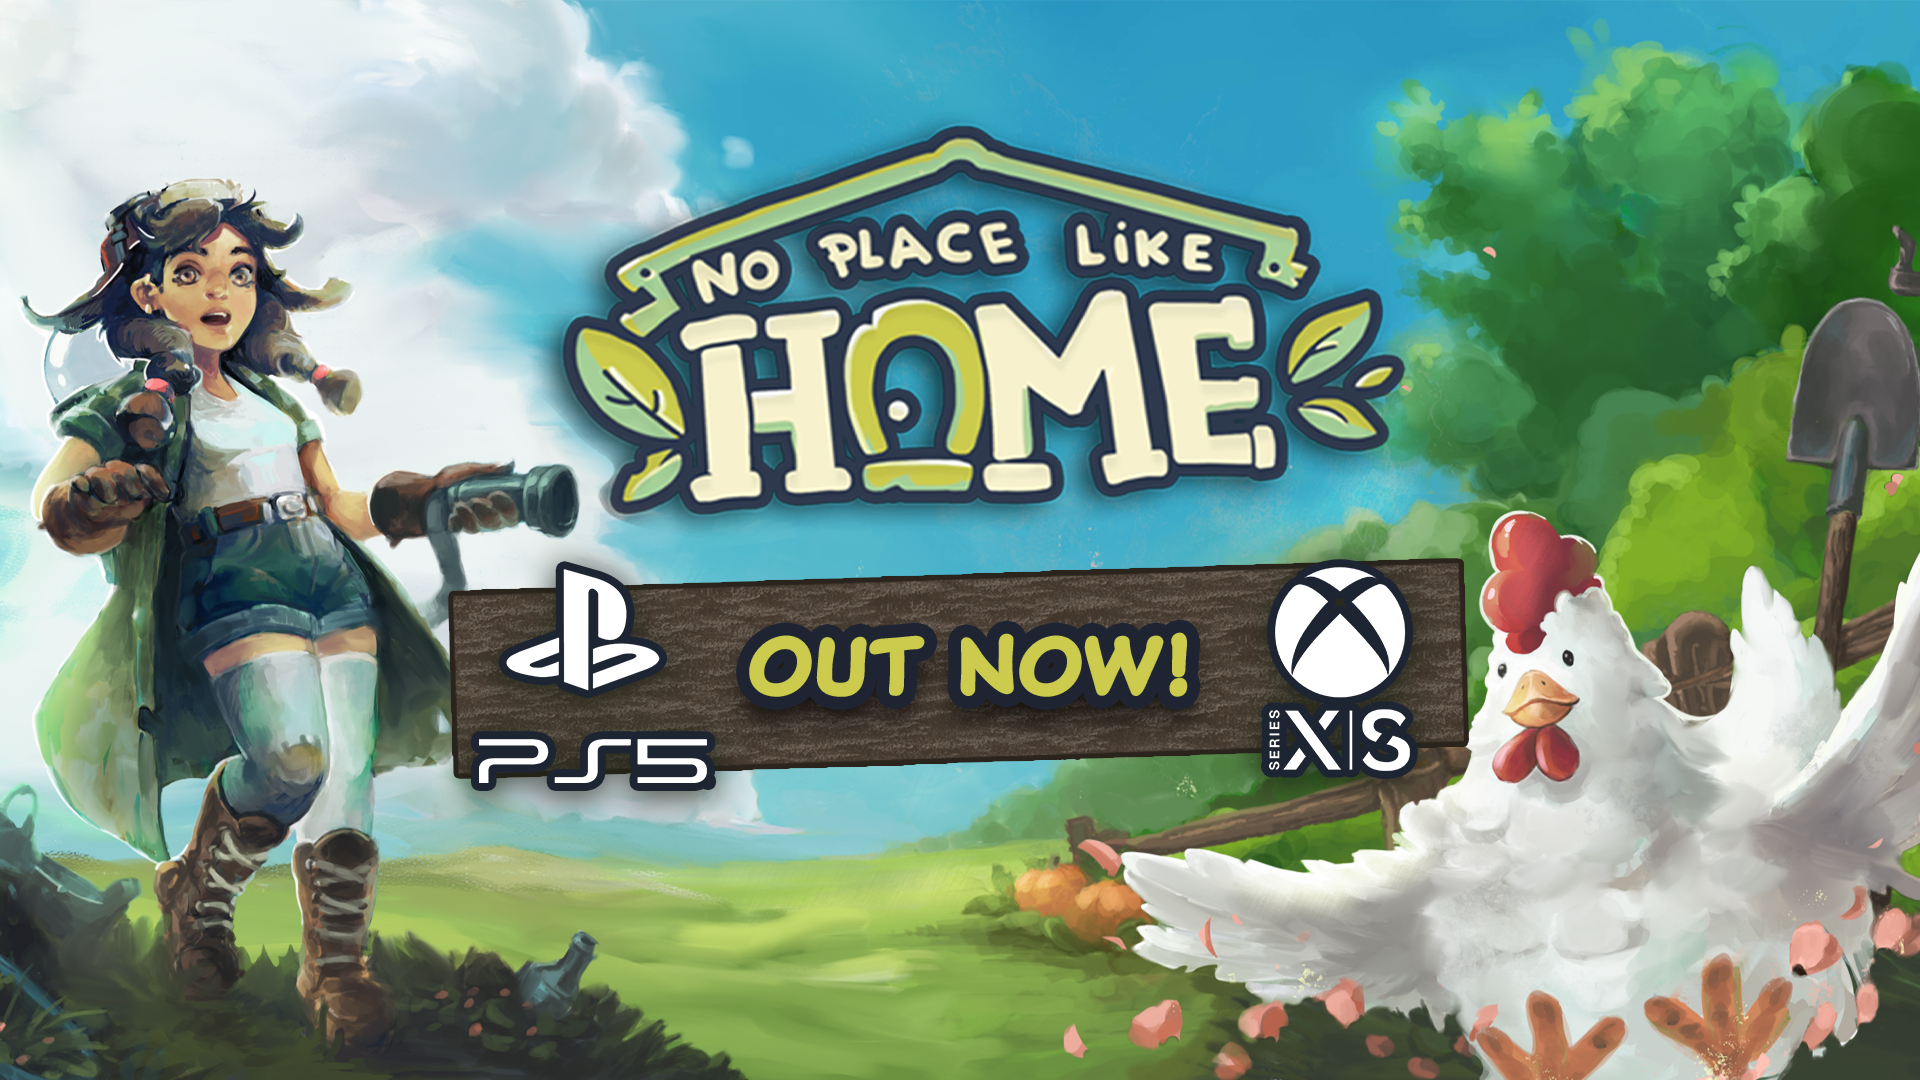 No Place Like Home is Available Now on PS5 and Xbox Series X/S!